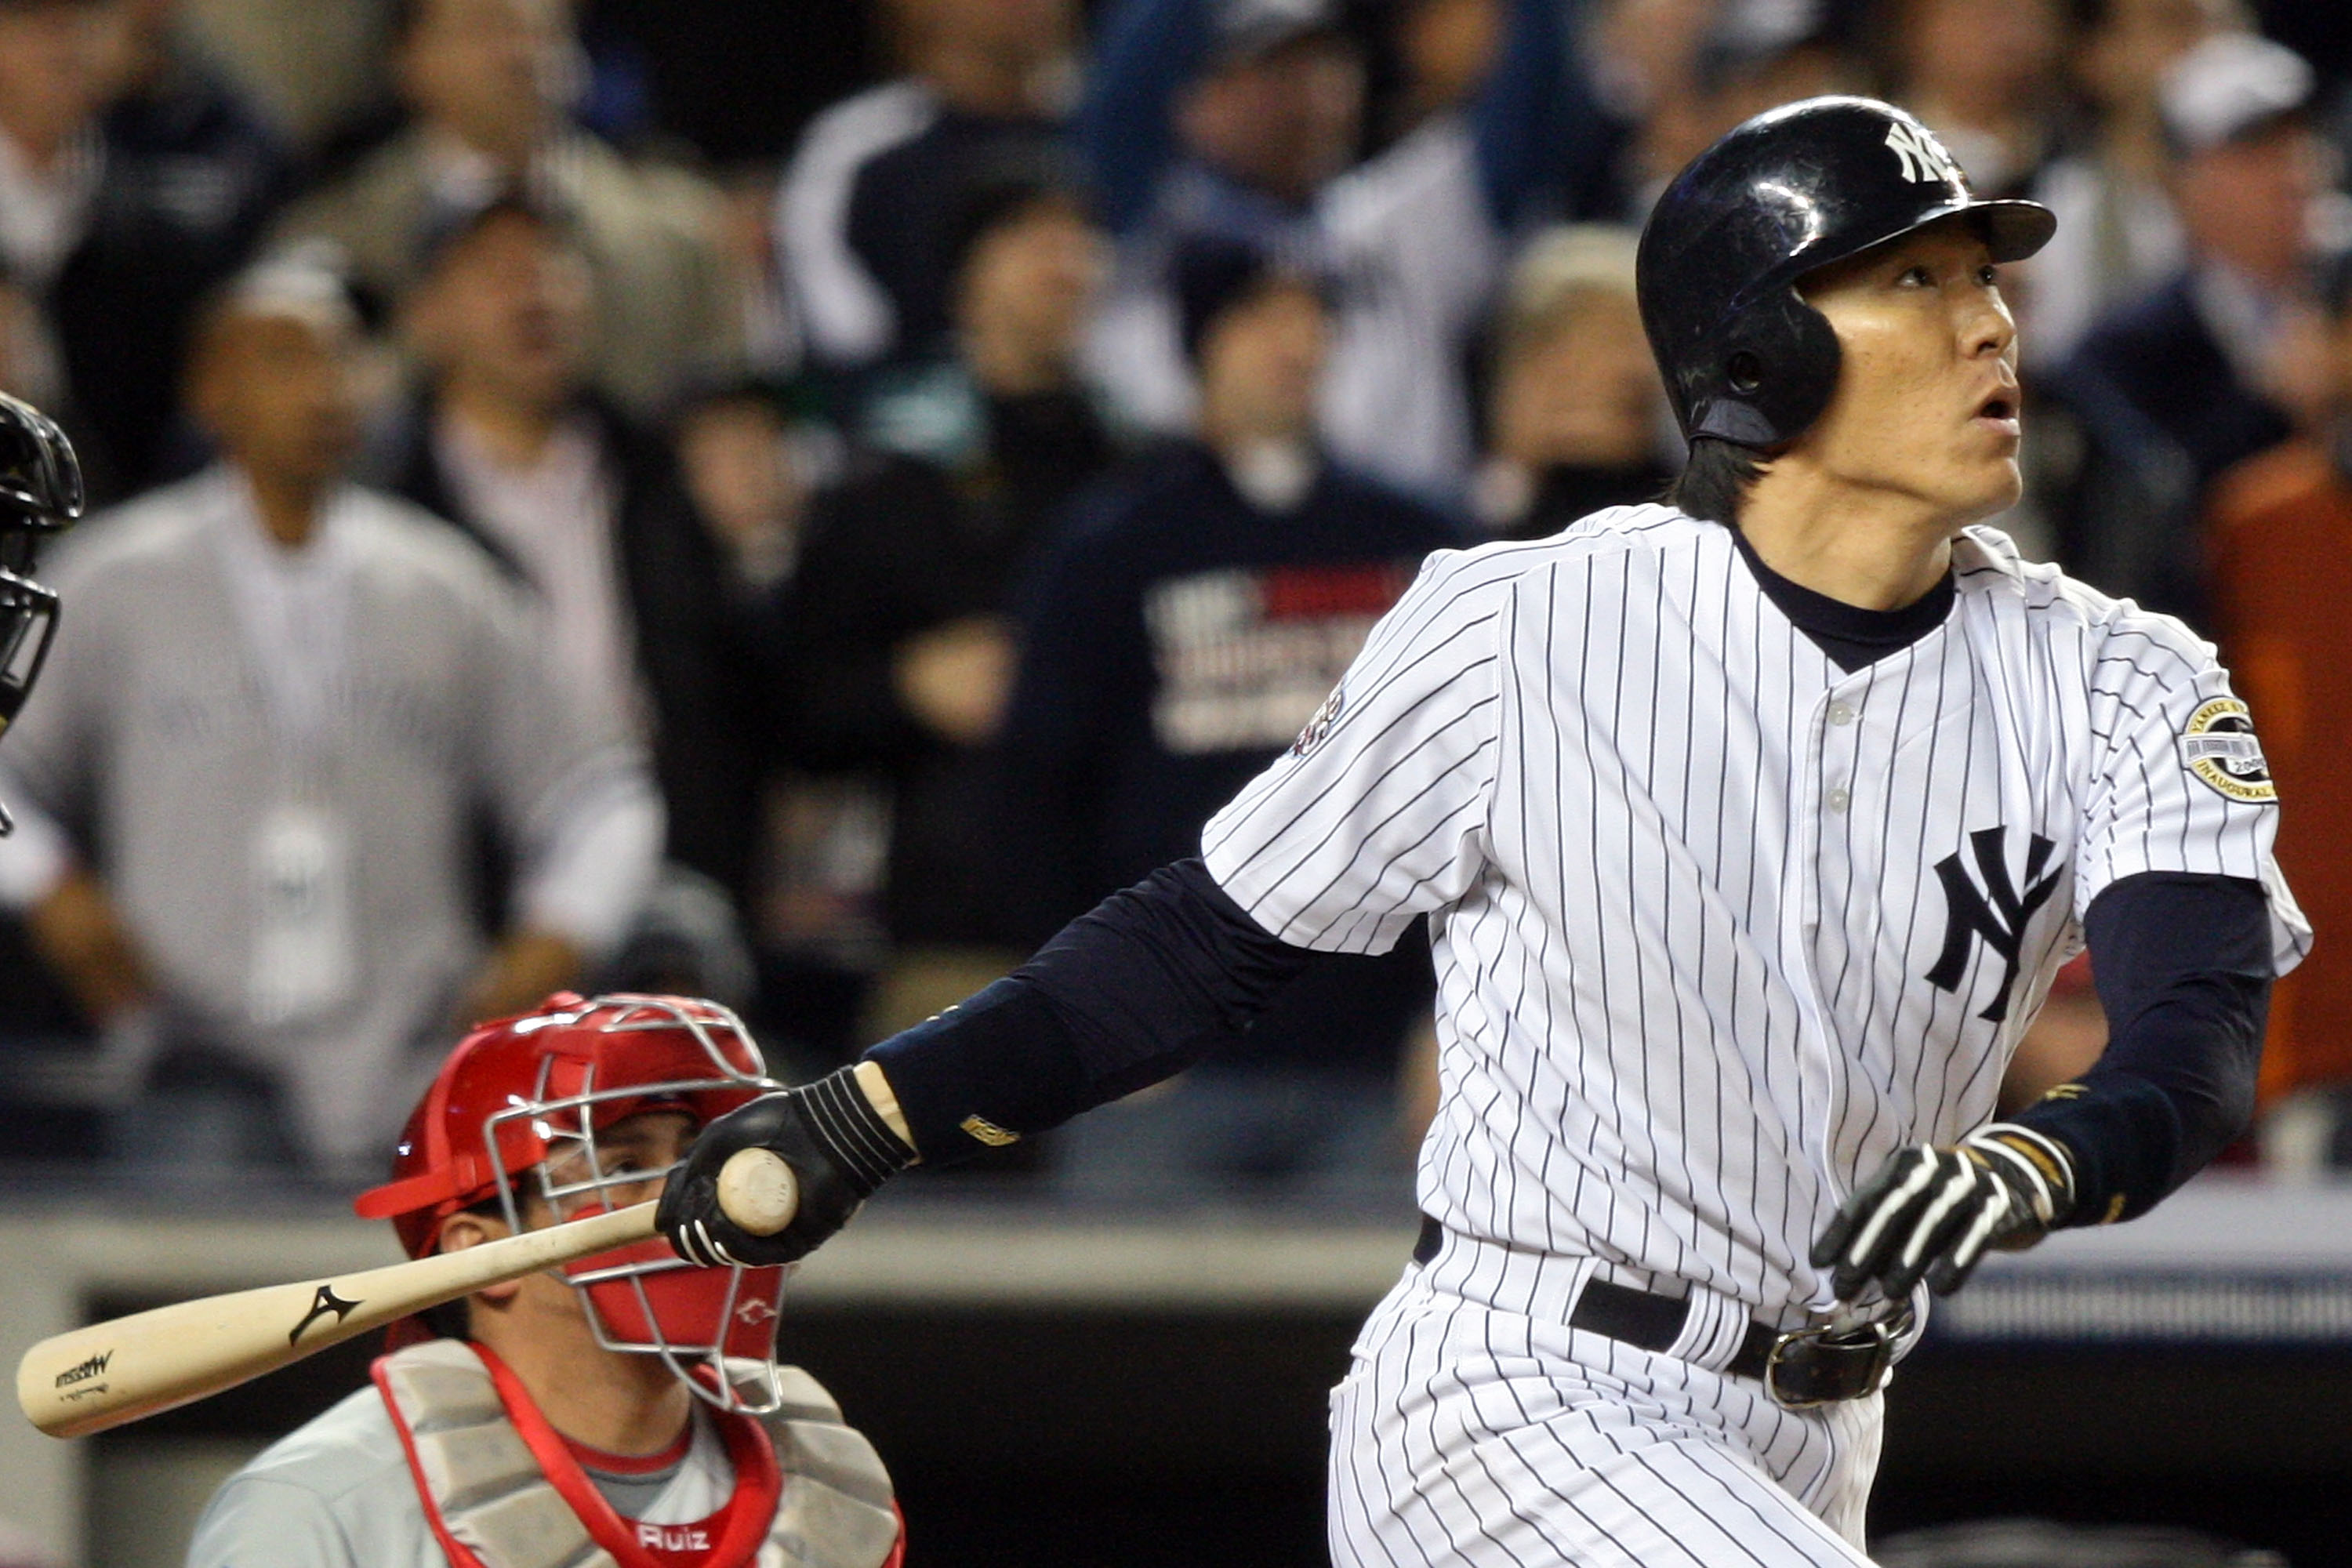 WS 2009 Gm 6: Matsui homers in an eight-pitch at-bat 